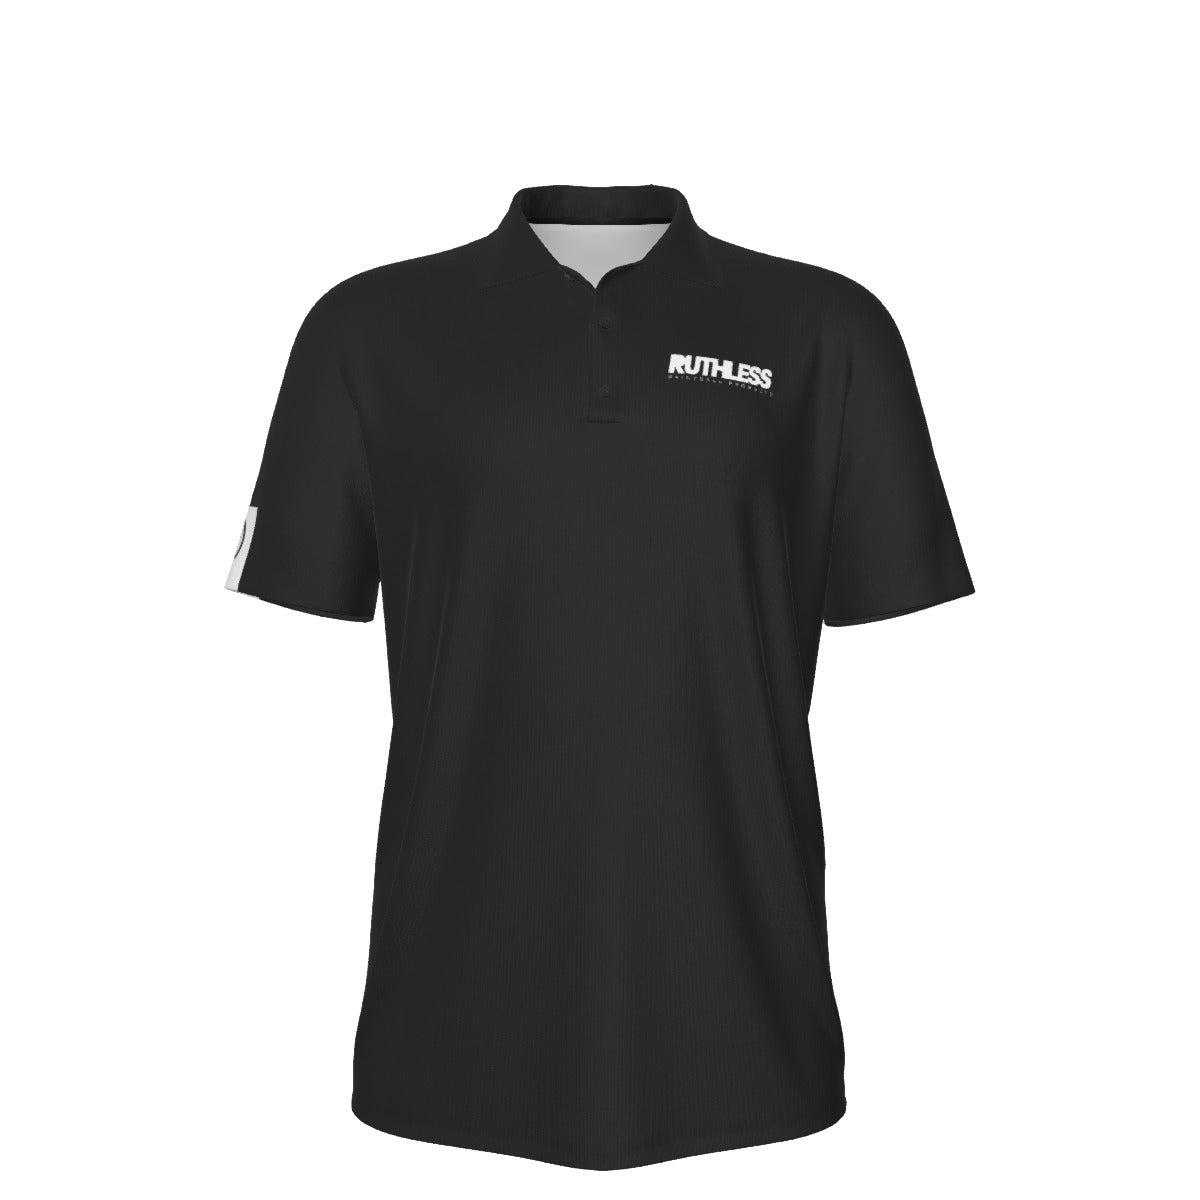 Ruthless Black Polo